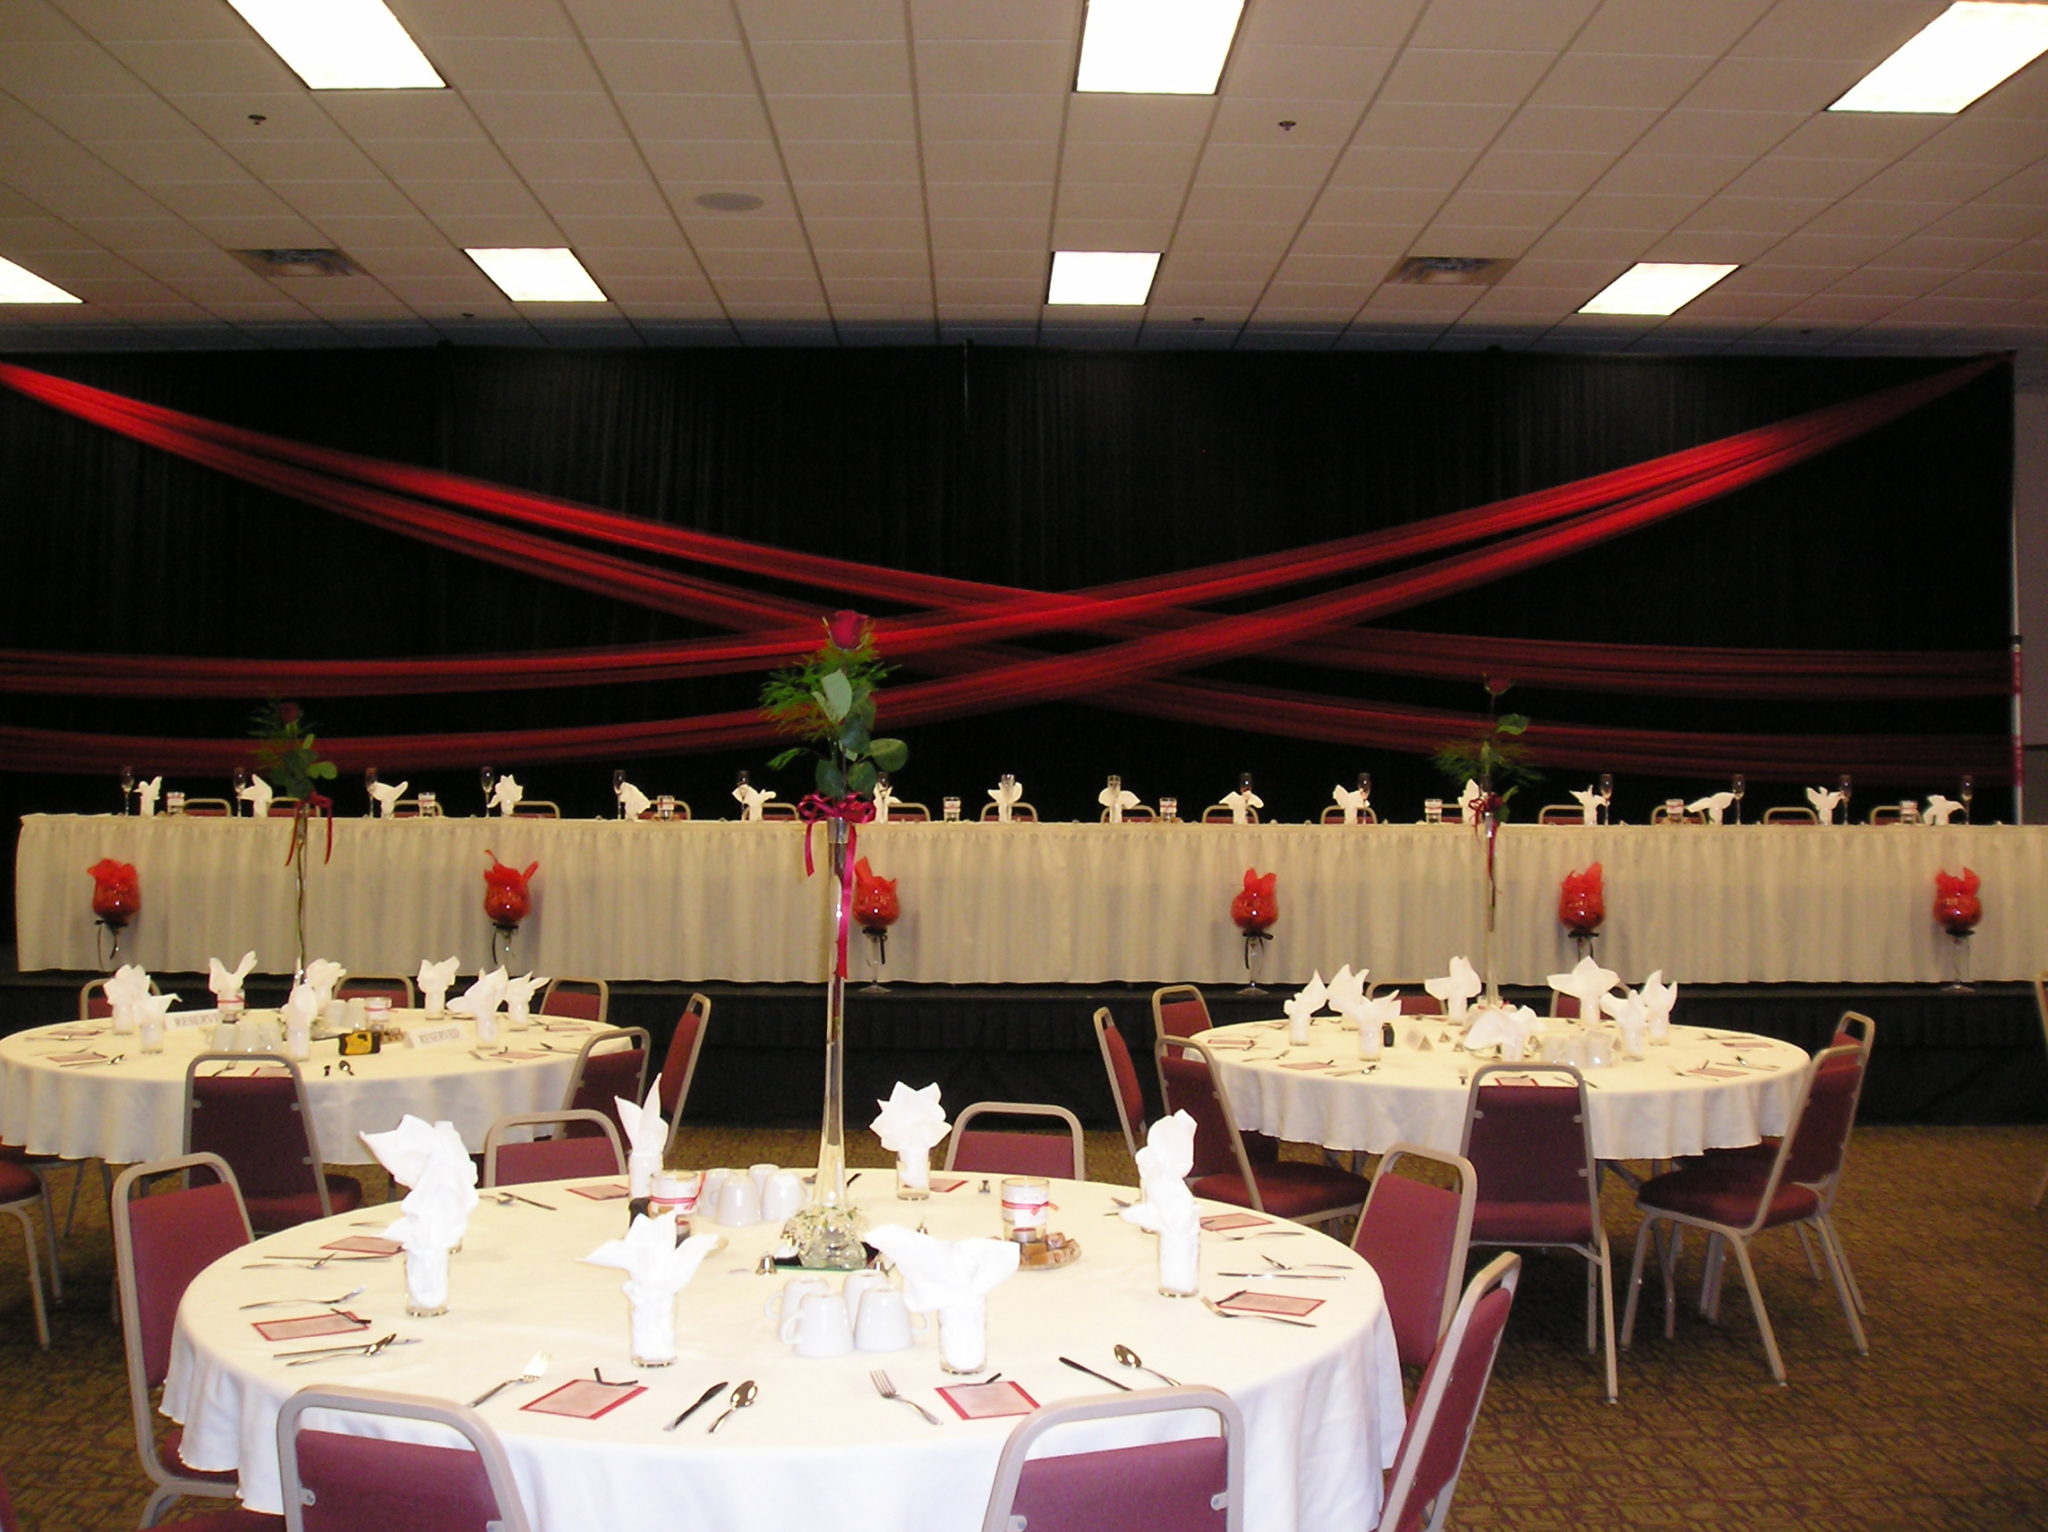 tables decorated for a wedding reception